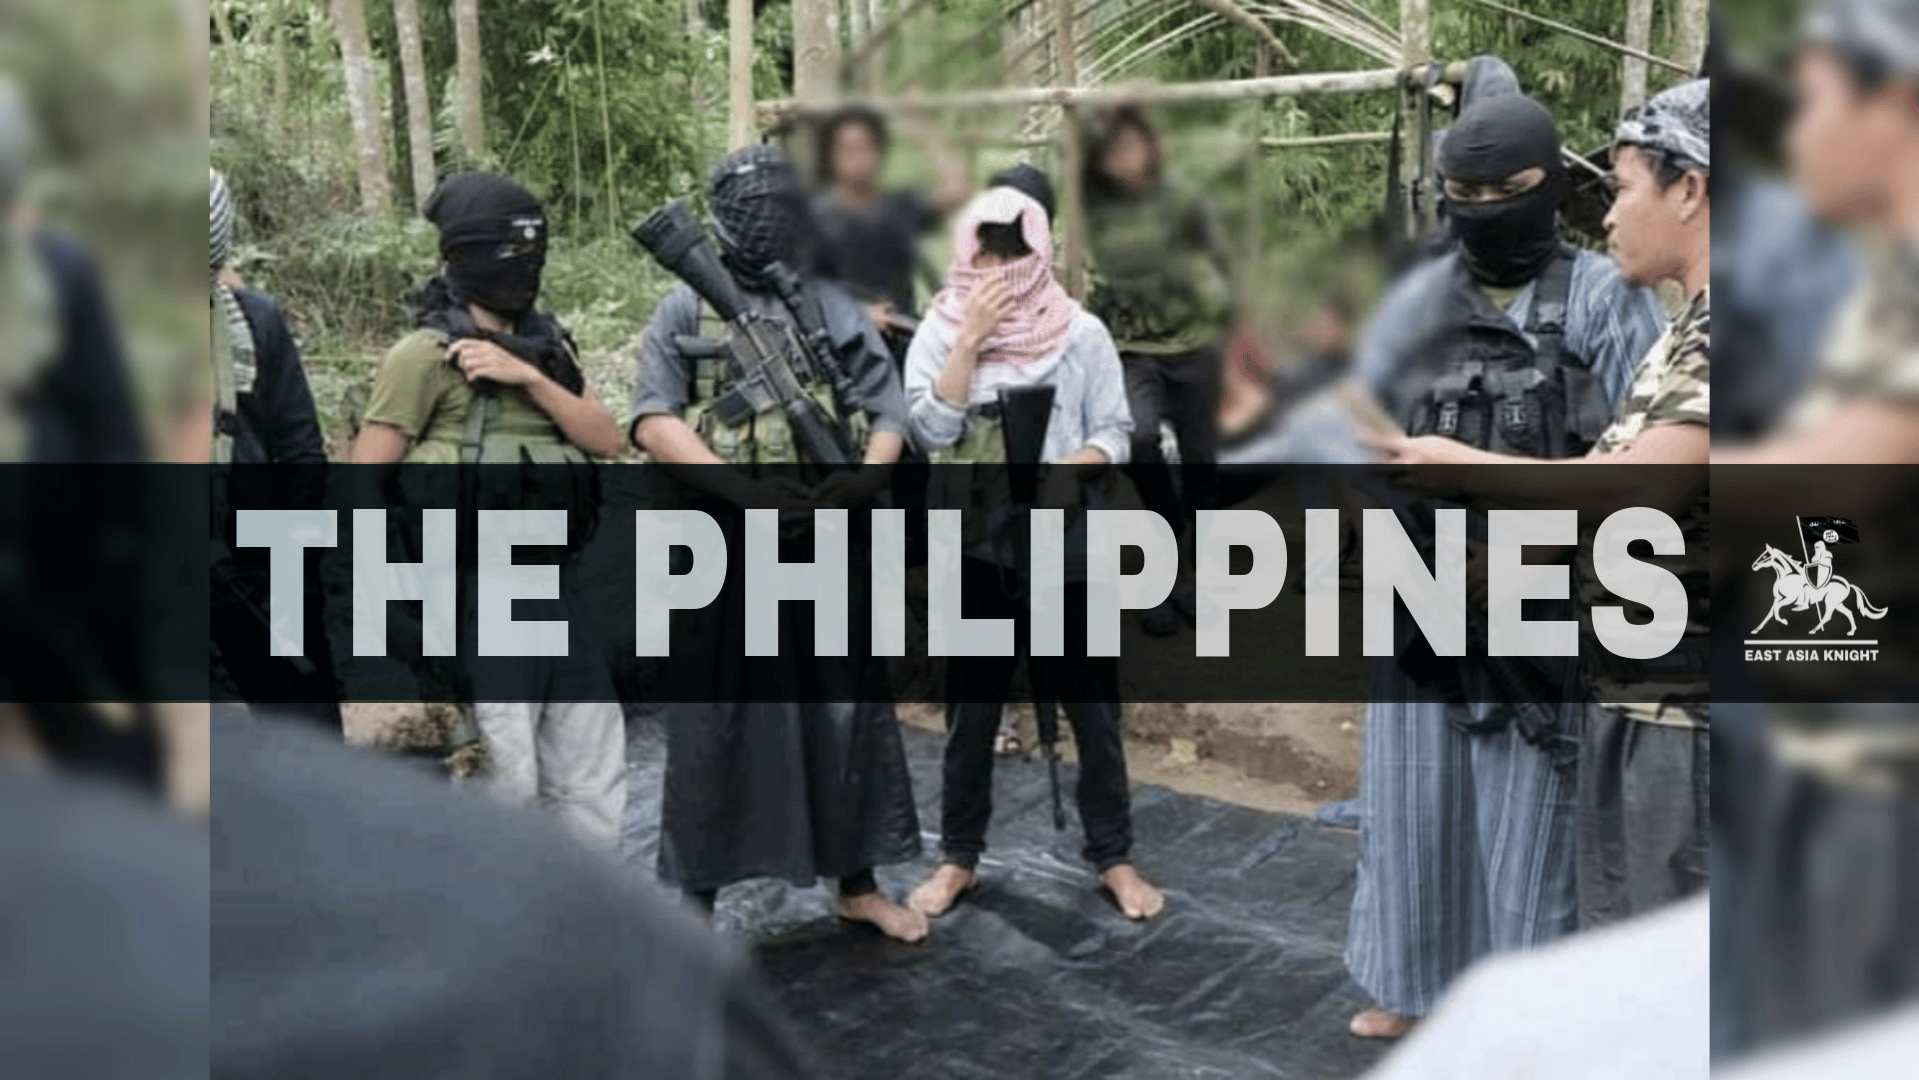 (Photos) East Asia Knights (Unofficial Islamic State East Asia/ISEA) Circulates Photos of ISEA Militants in the Philippines - 24 December 2022